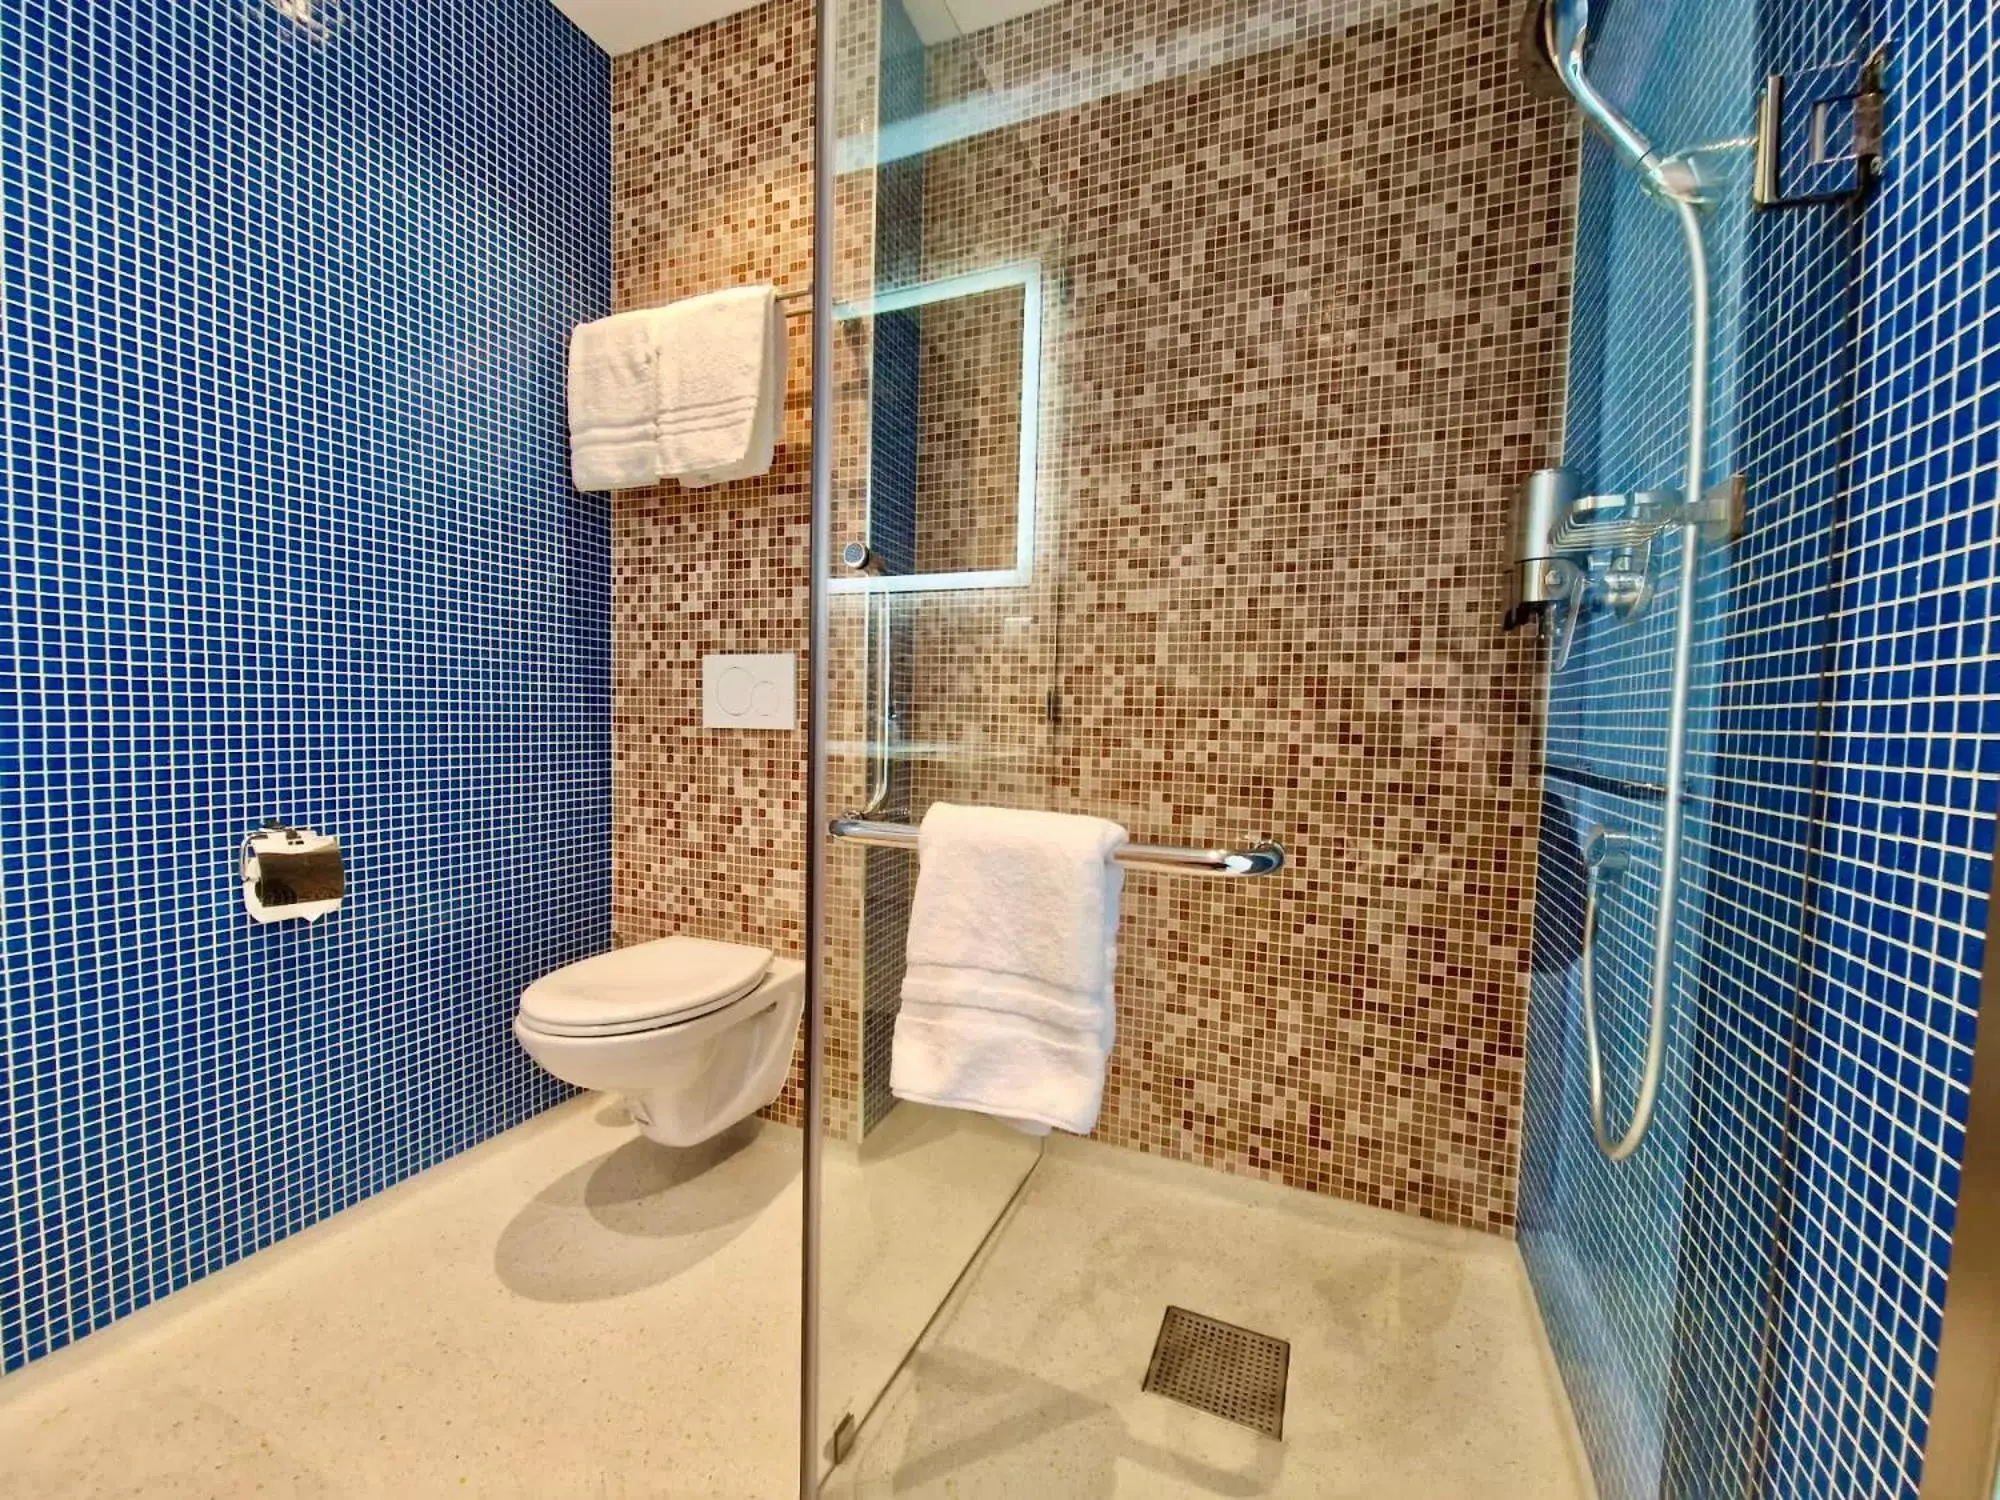 Bathroom in Chassé Hotel Residency - Newly opened